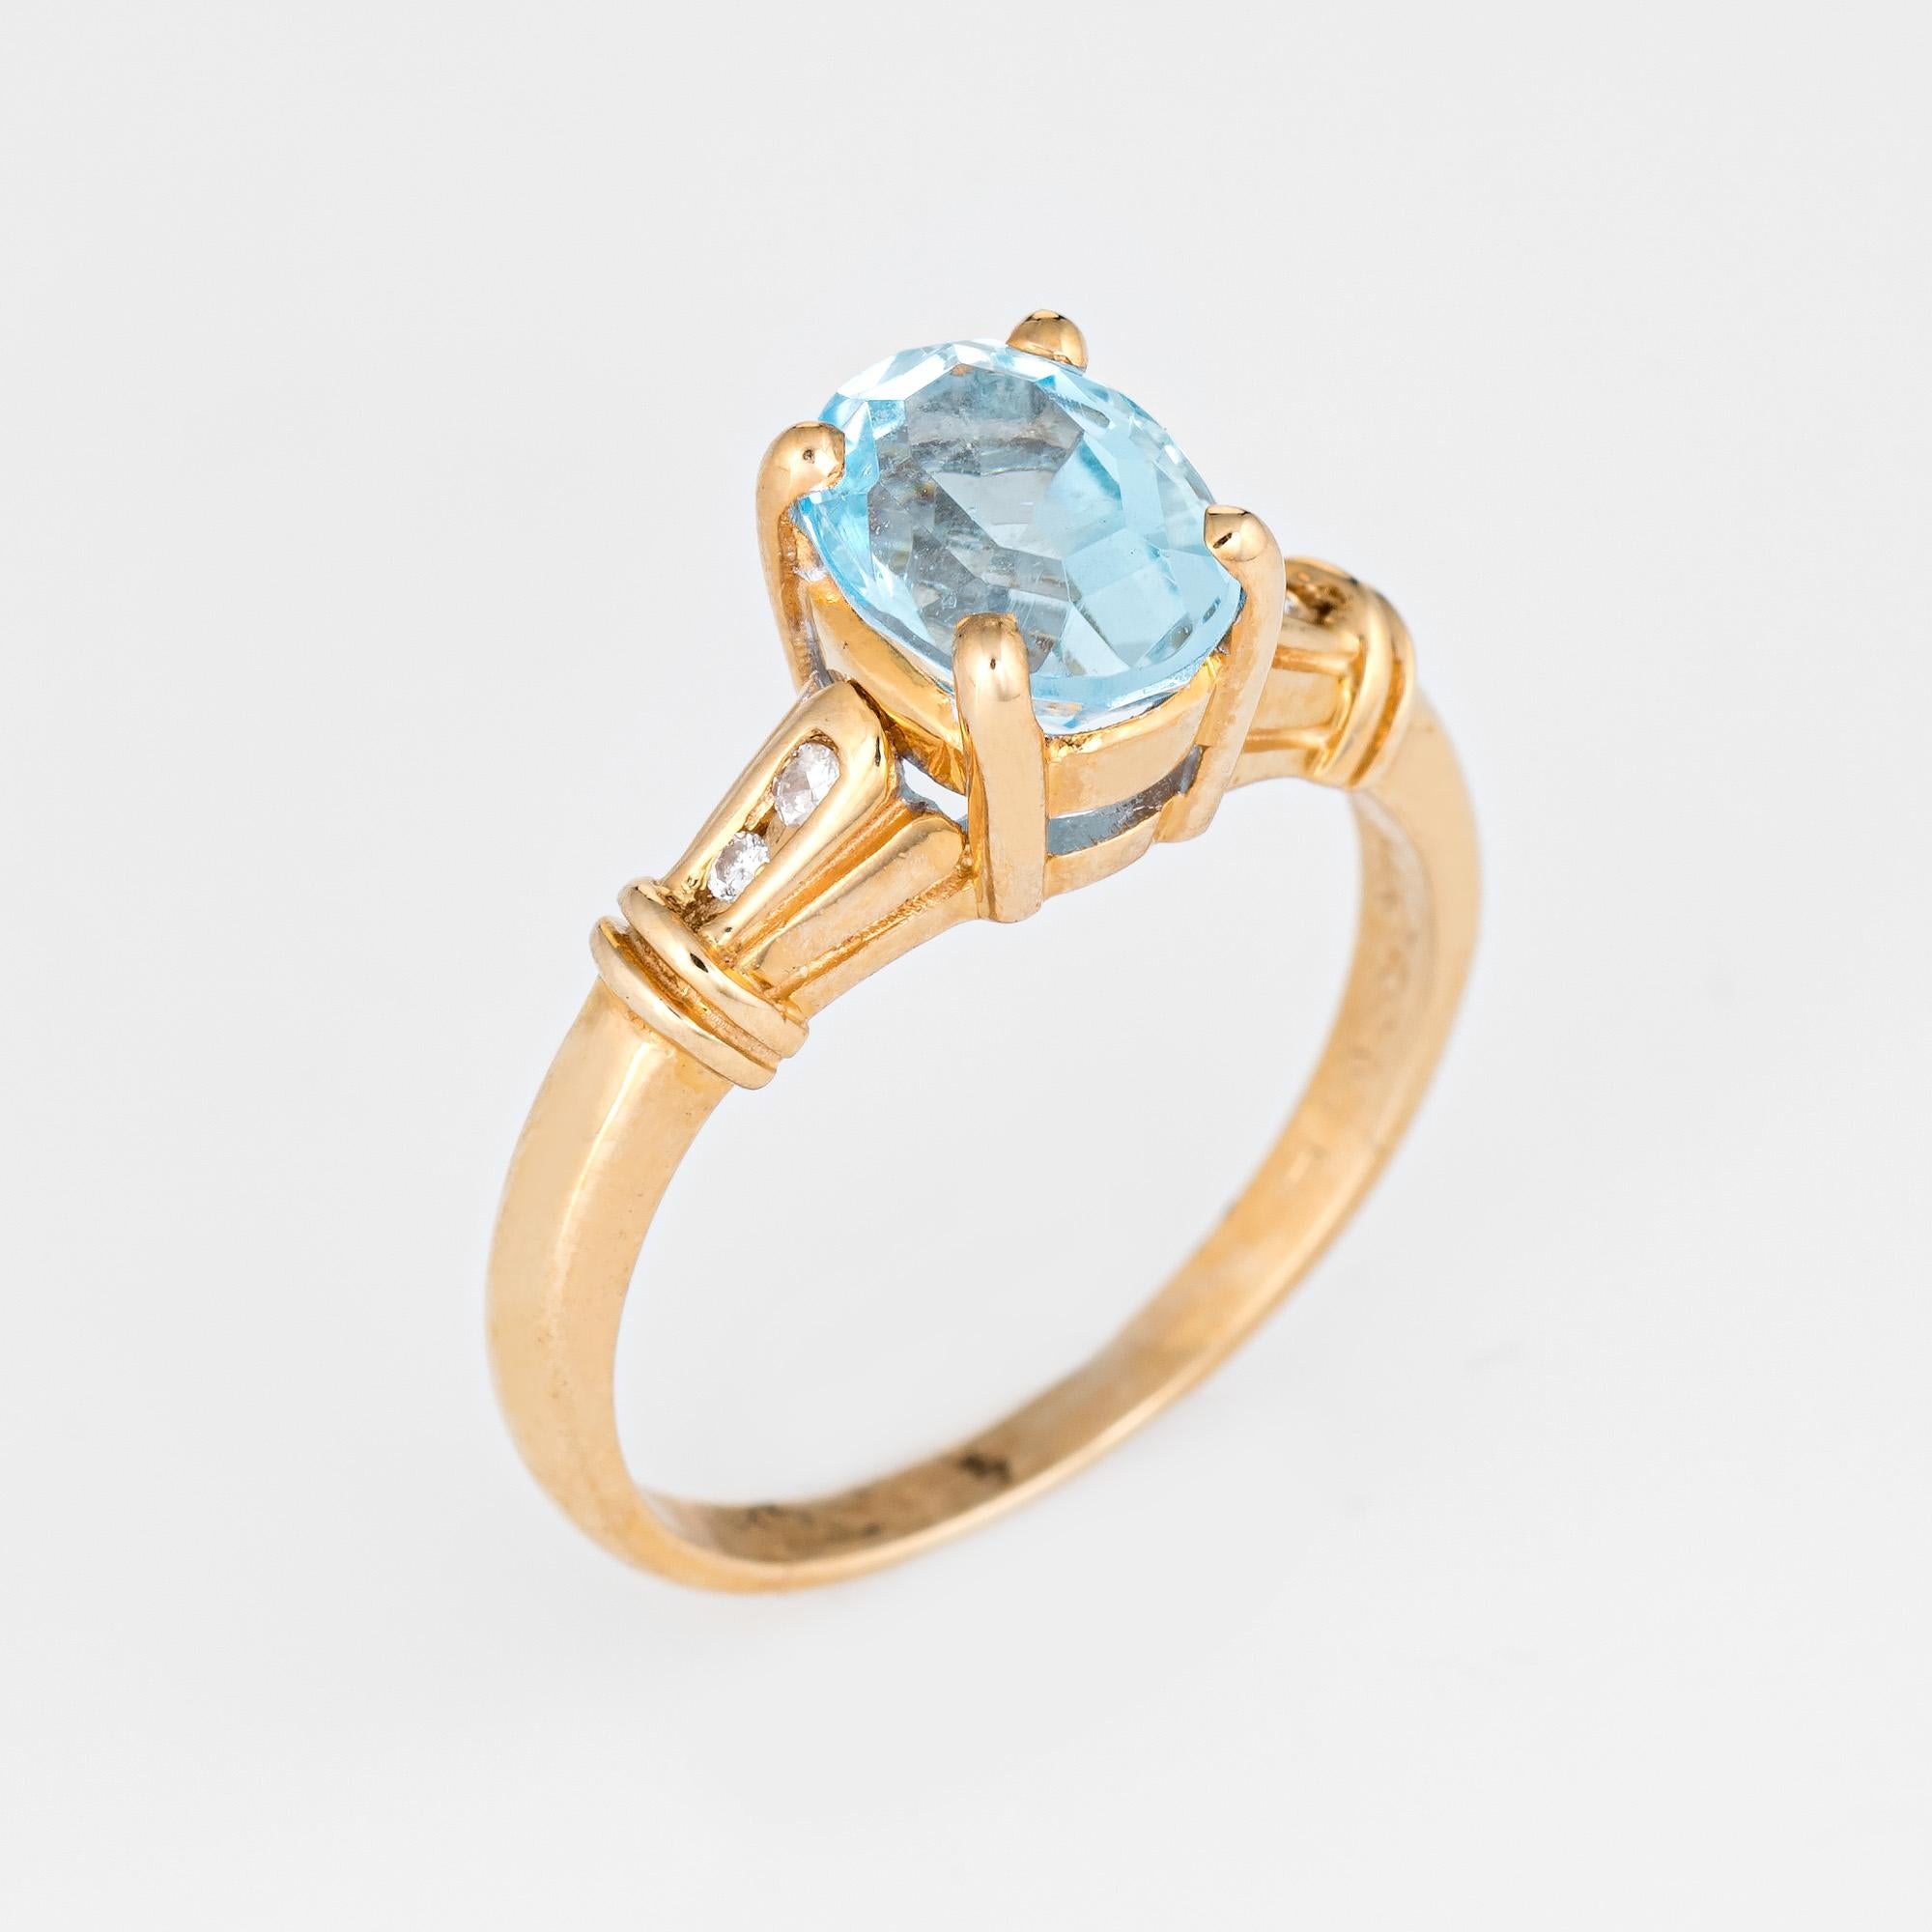 Stylish blue topaz & diamond small cocktail ring crafted in 14 karat yellow gold. 

Faceted oval blue topaz measures 8mm x 6mm (estimated at 1 carat) is accented with 0.04 carats of diamonds (estimated at H-I color and SI1-2 clarity). The topaz is